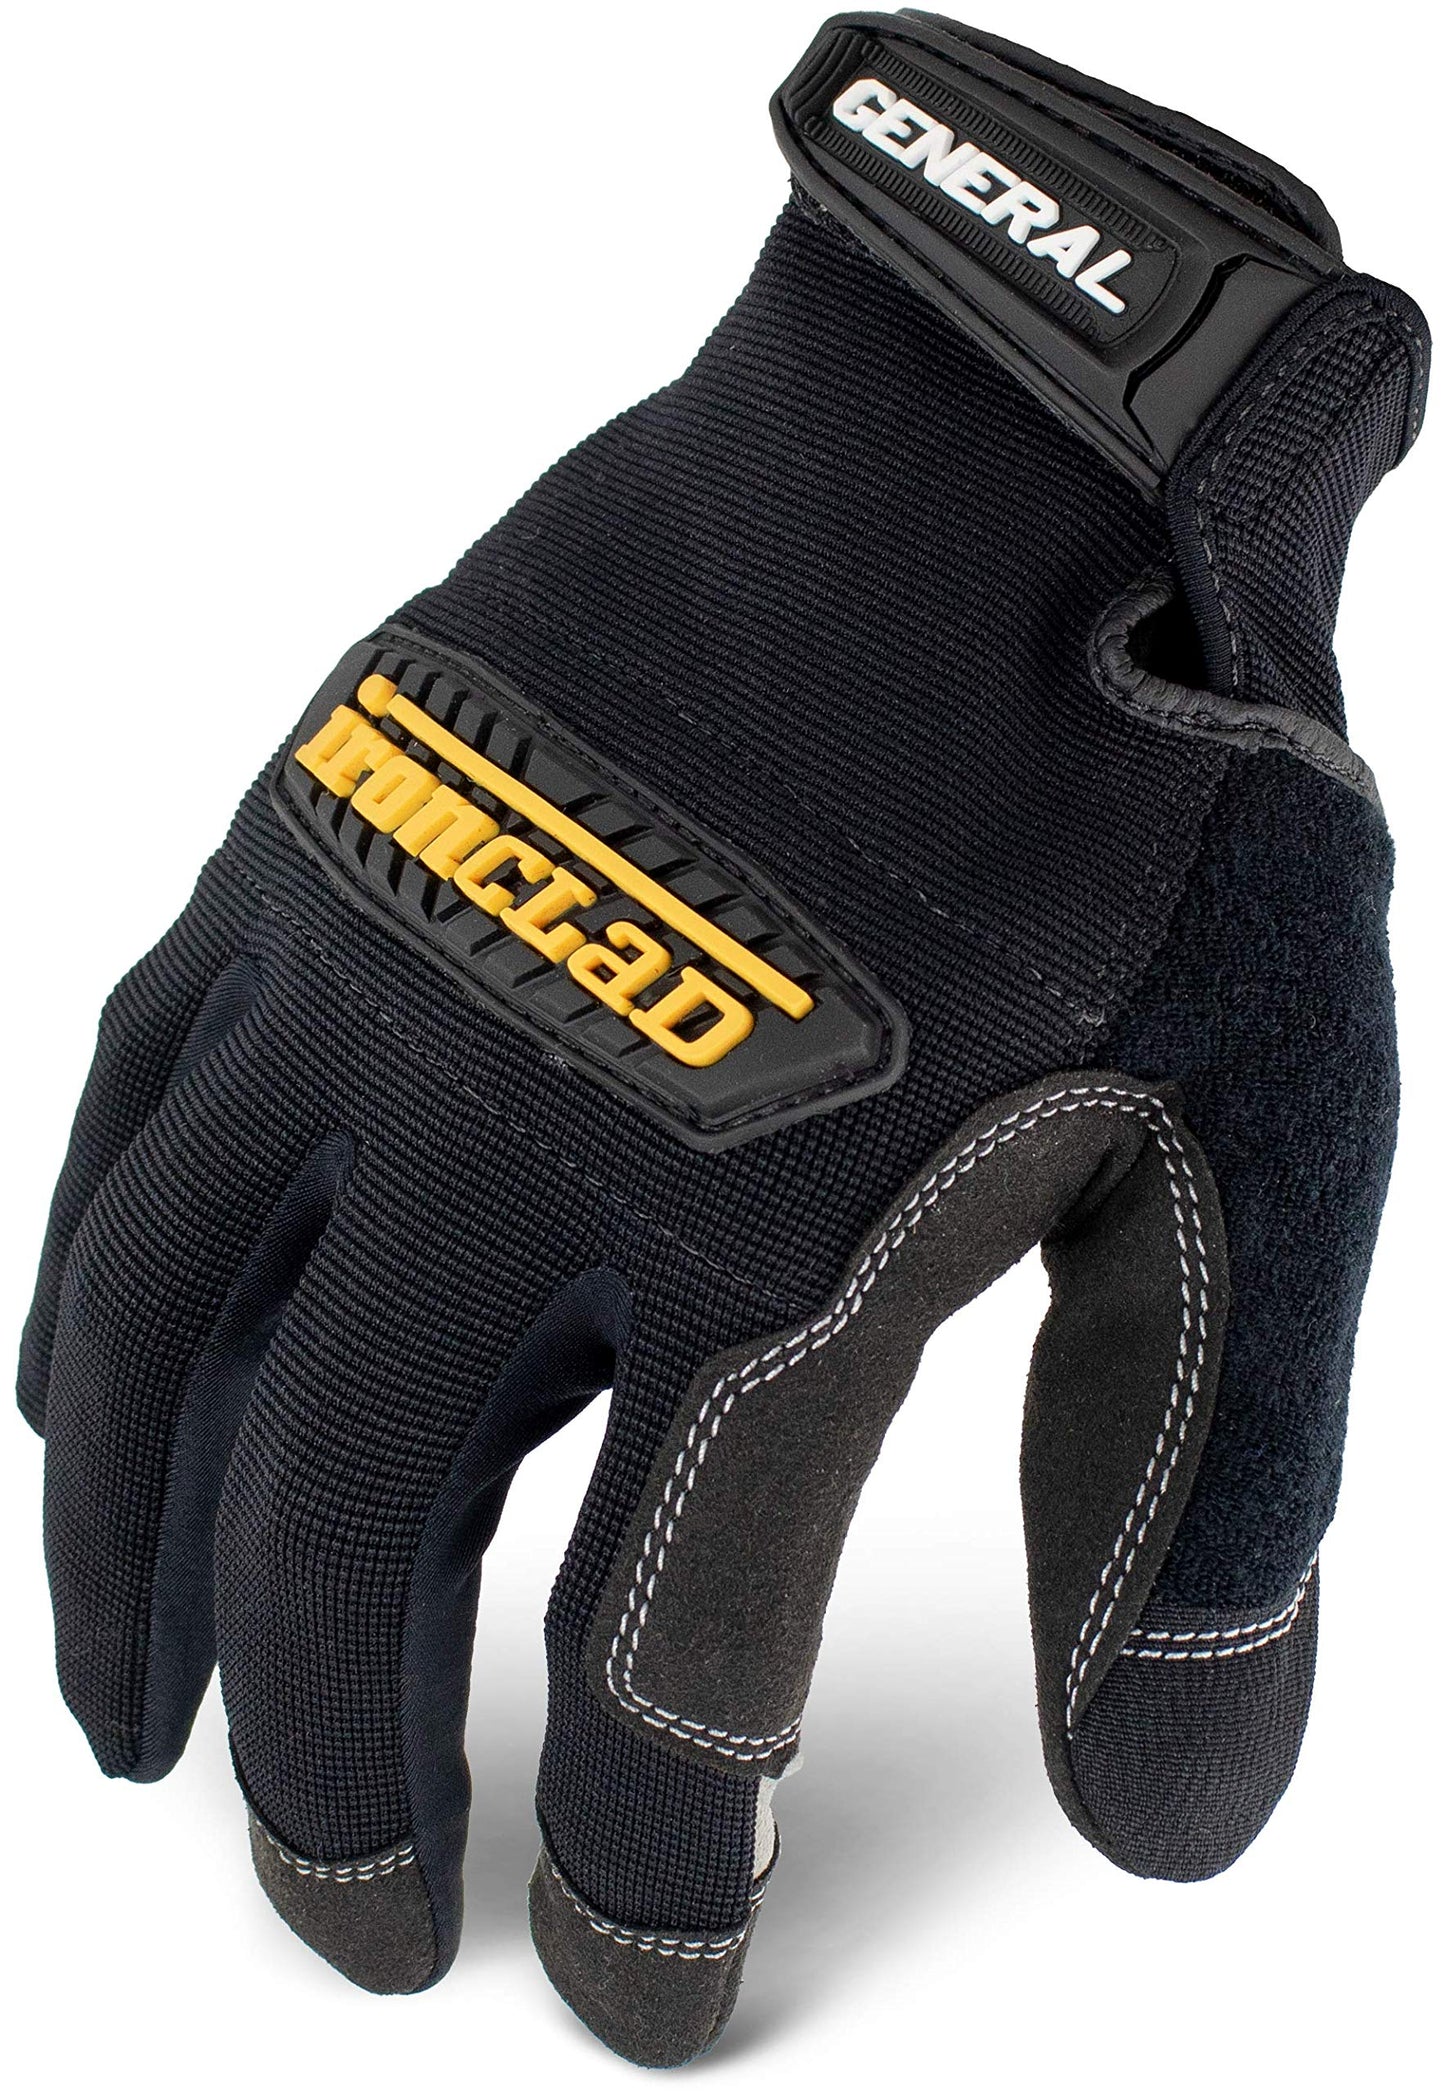 Ironclad General Utility Work Gloves GUG, All-Purpose, Performance Fit, Durable, Machine Washable, Sized XS, S, M, L, XL, XXL (1 Pair)